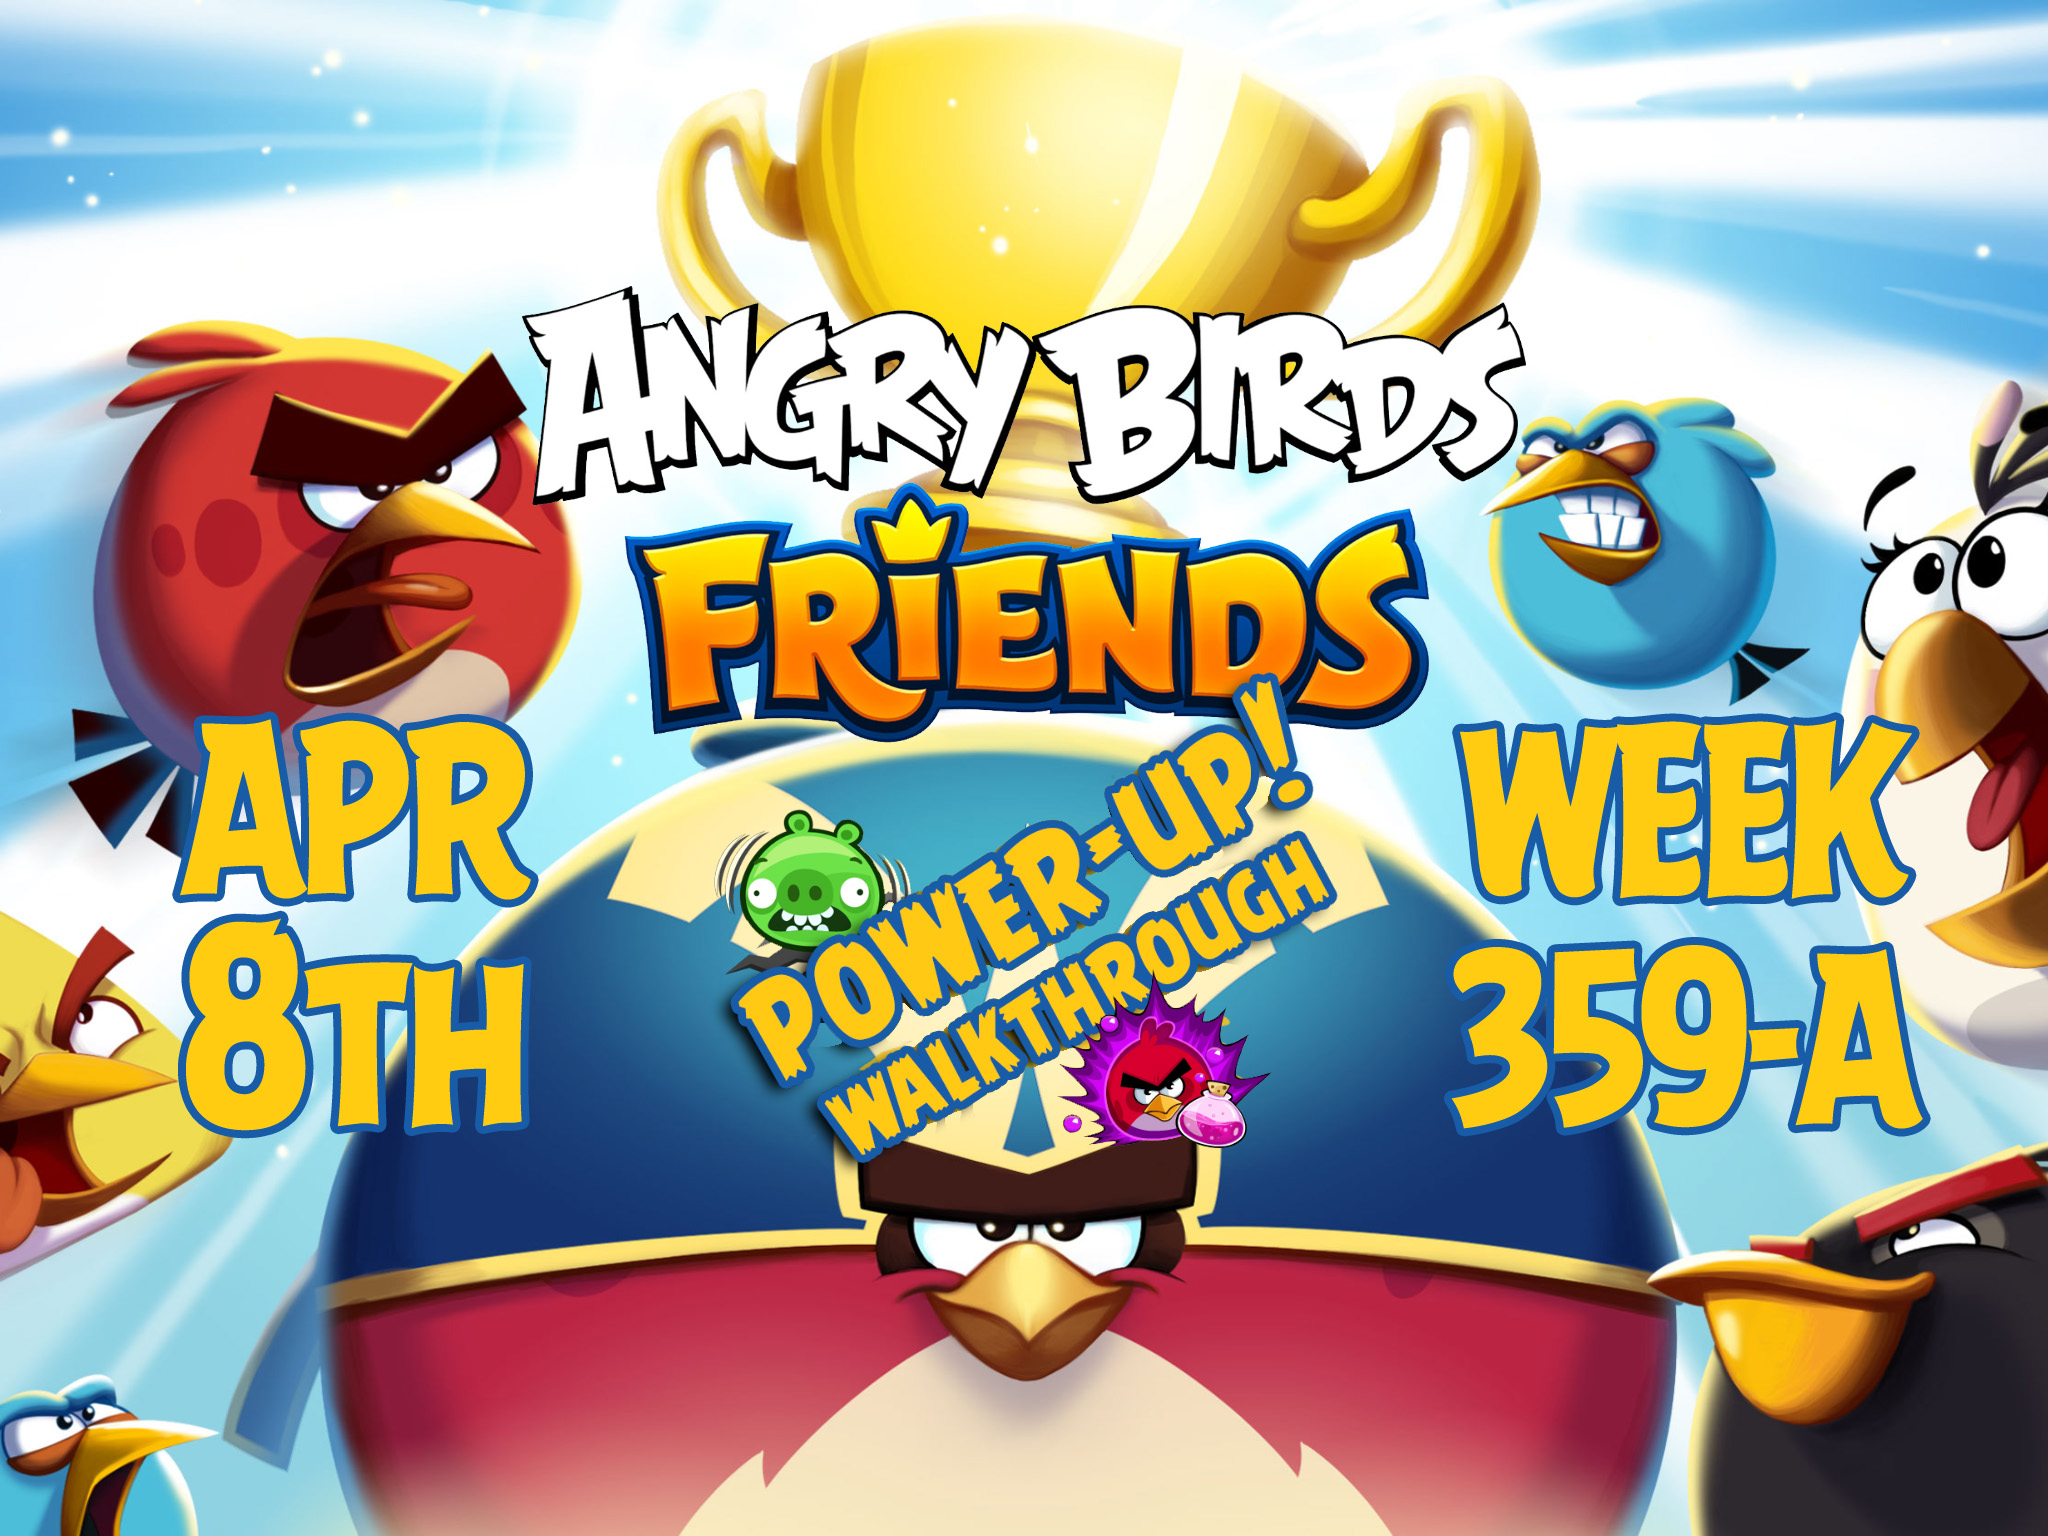 Angry-Birds-Friends-Tournament-Week-359-A-Feature-Image-PU